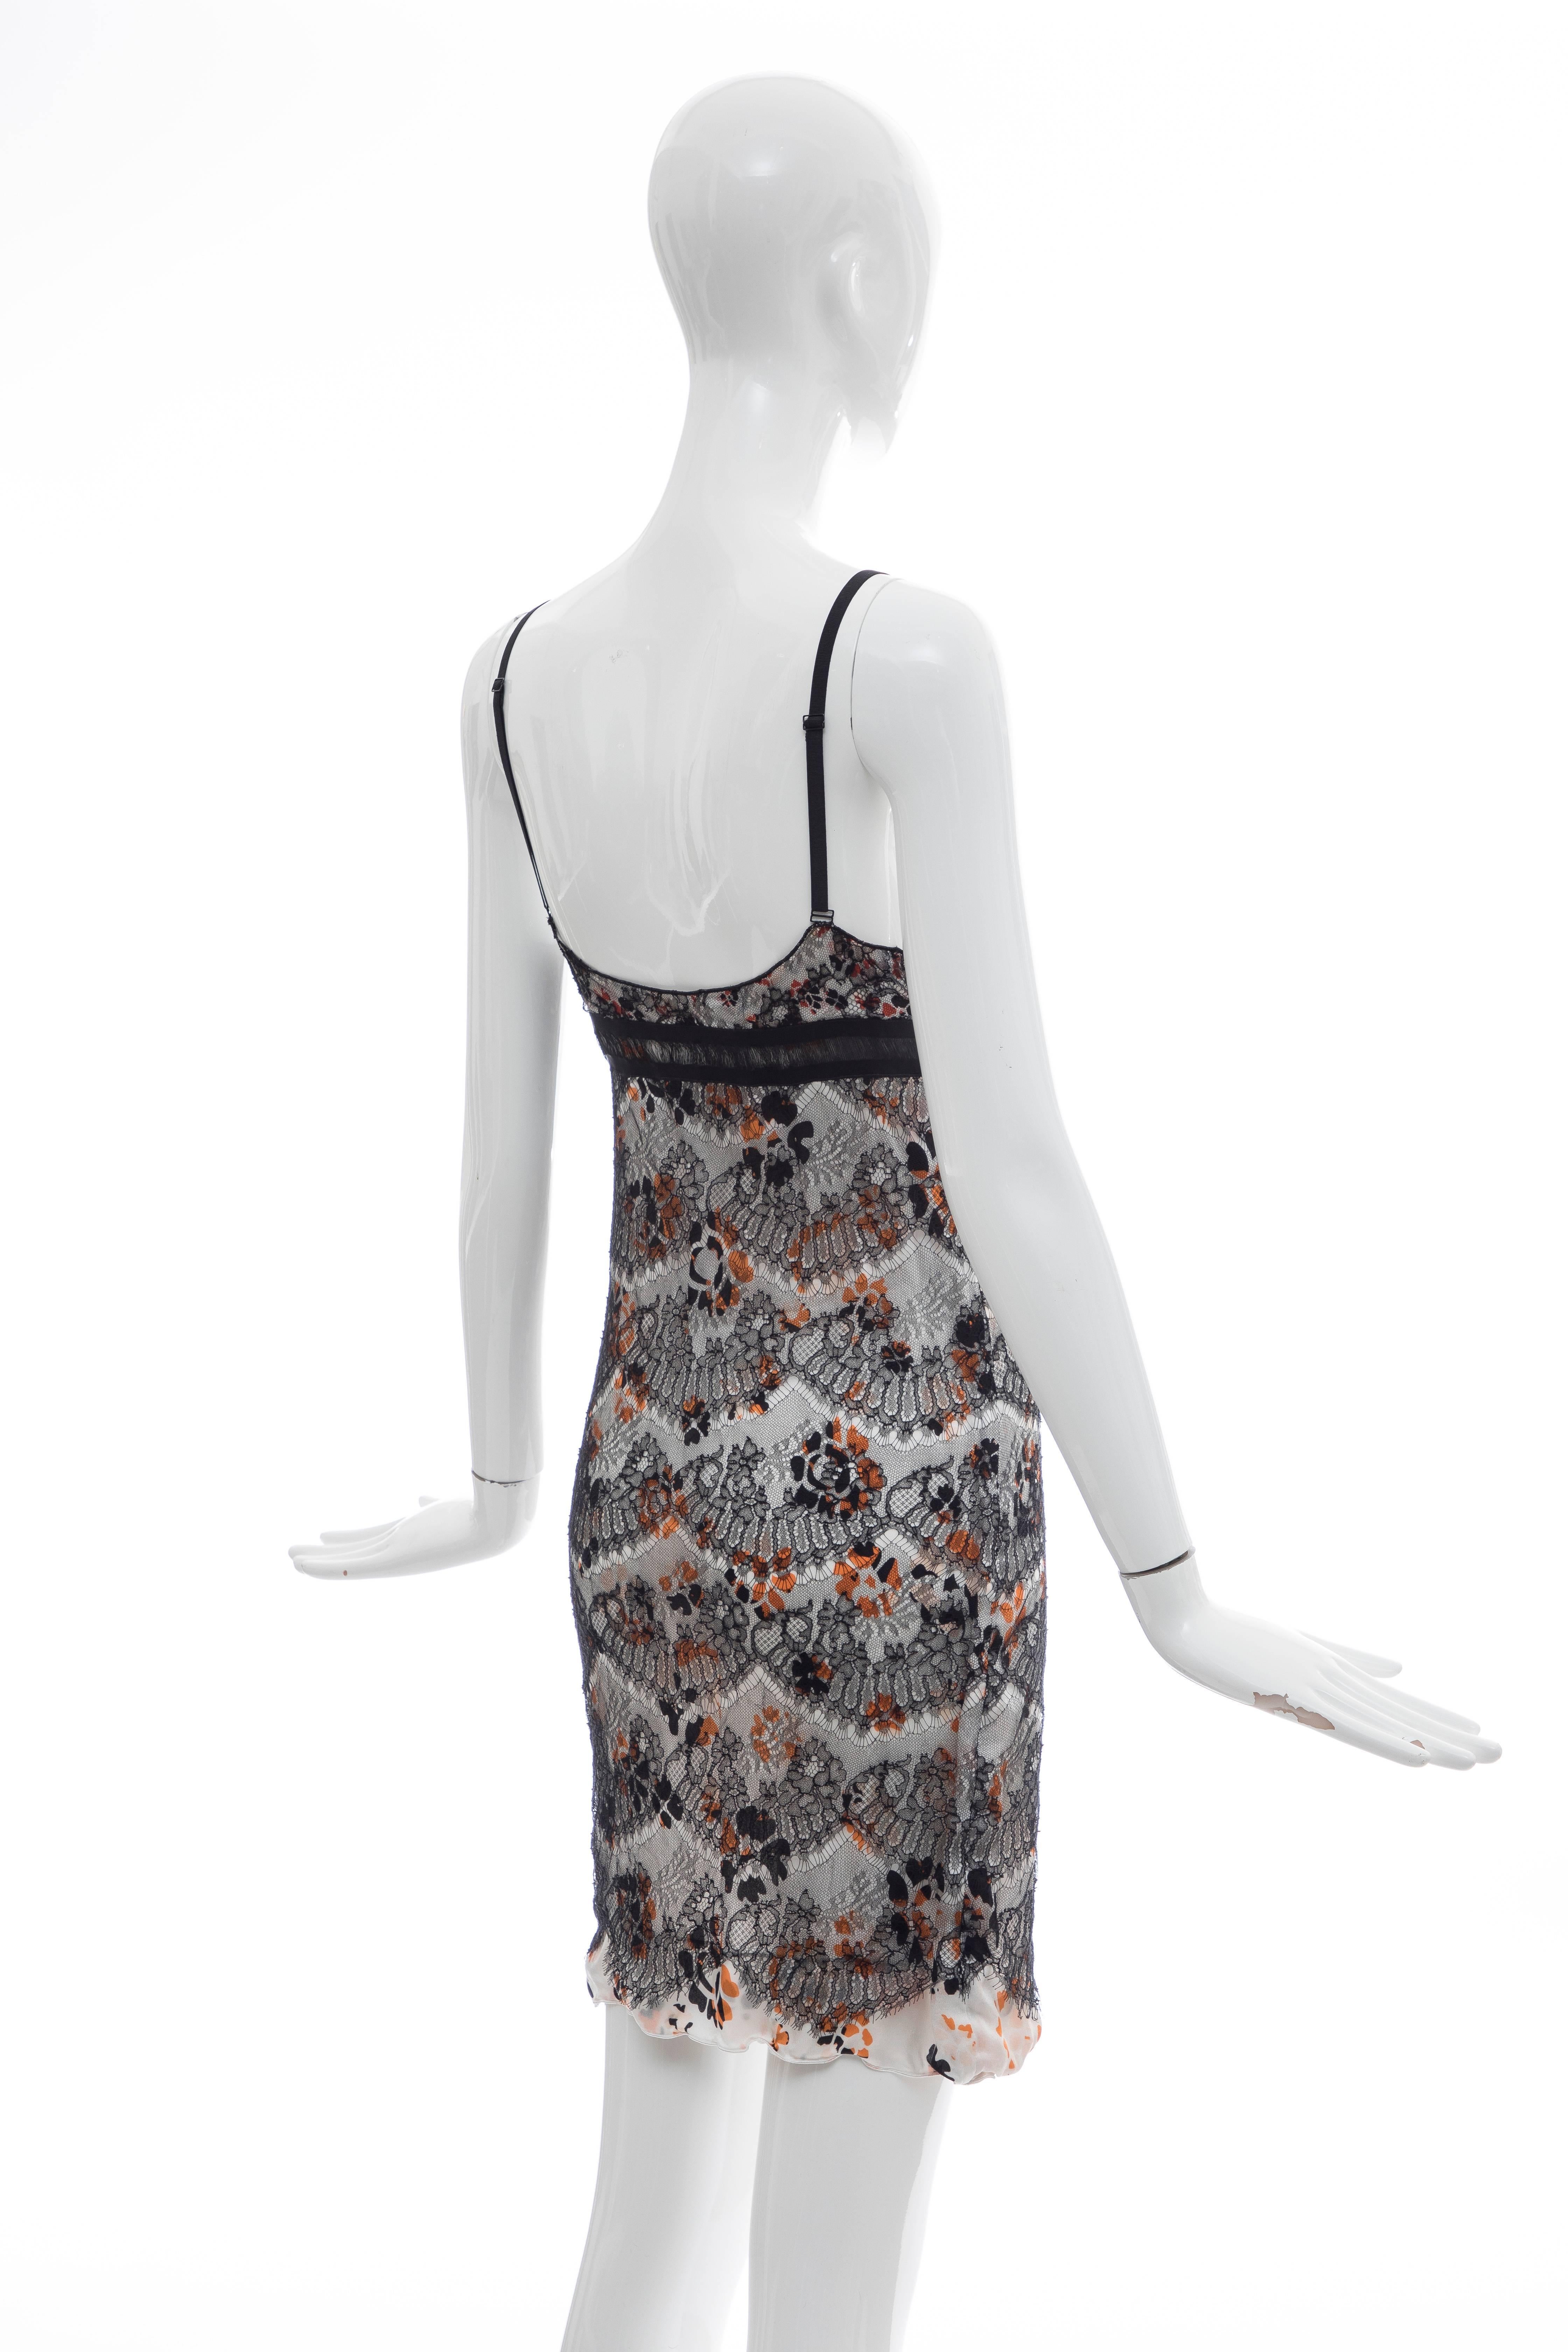 Olivier Theyskens Rochas Black Lace Overlay Floral Silk Slip Dress, Fall 2003  In Excellent Condition For Sale In Cincinnati, OH